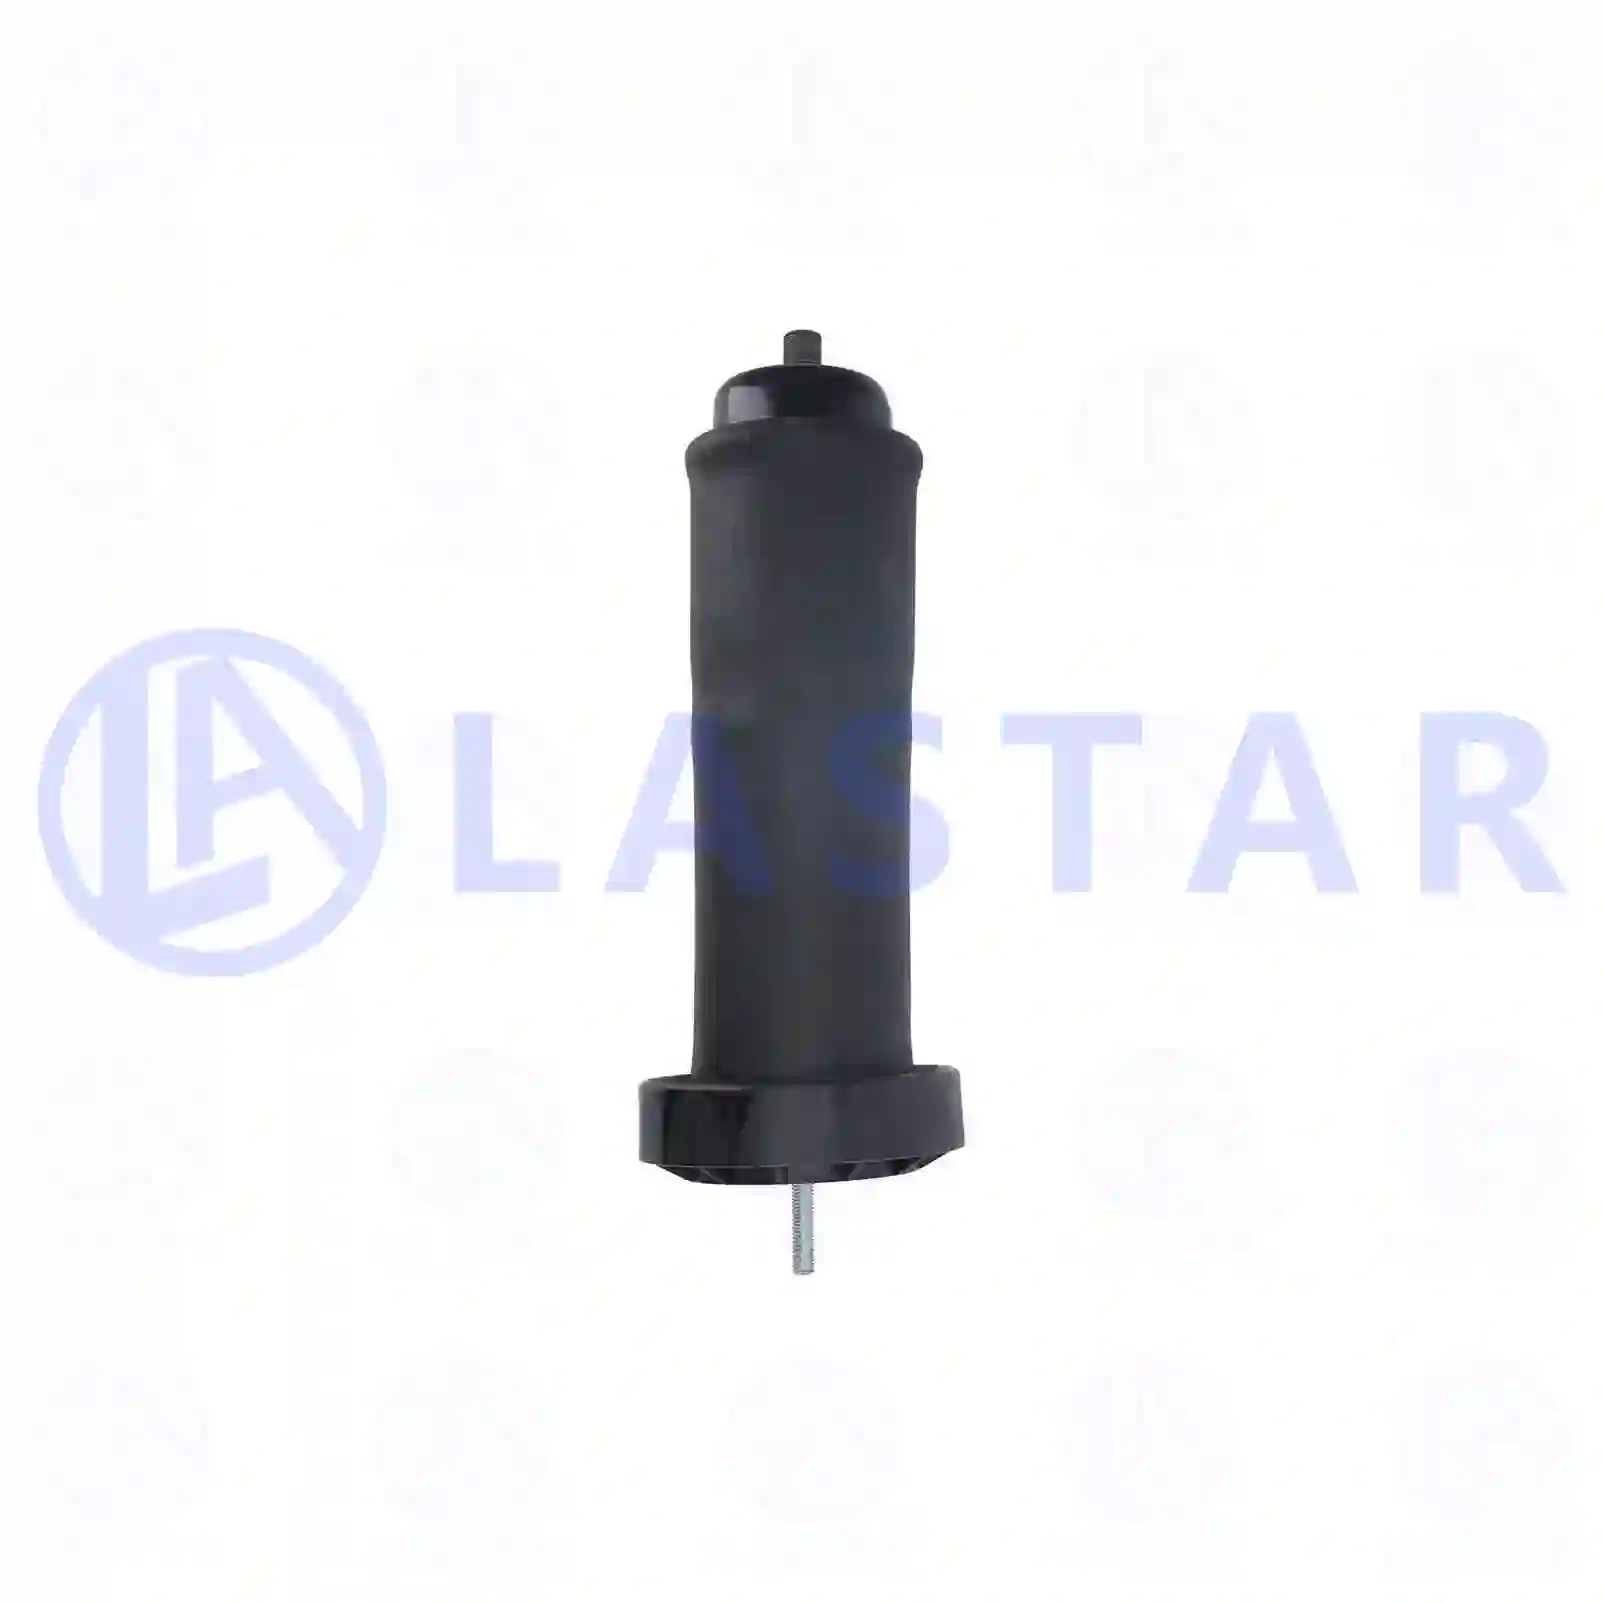 Air spring, with steel piston, 77729614, 20534646, , , , ||  77729614 Lastar Spare Part | Truck Spare Parts, Auotomotive Spare Parts Air spring, with steel piston, 77729614, 20534646, , , , ||  77729614 Lastar Spare Part | Truck Spare Parts, Auotomotive Spare Parts